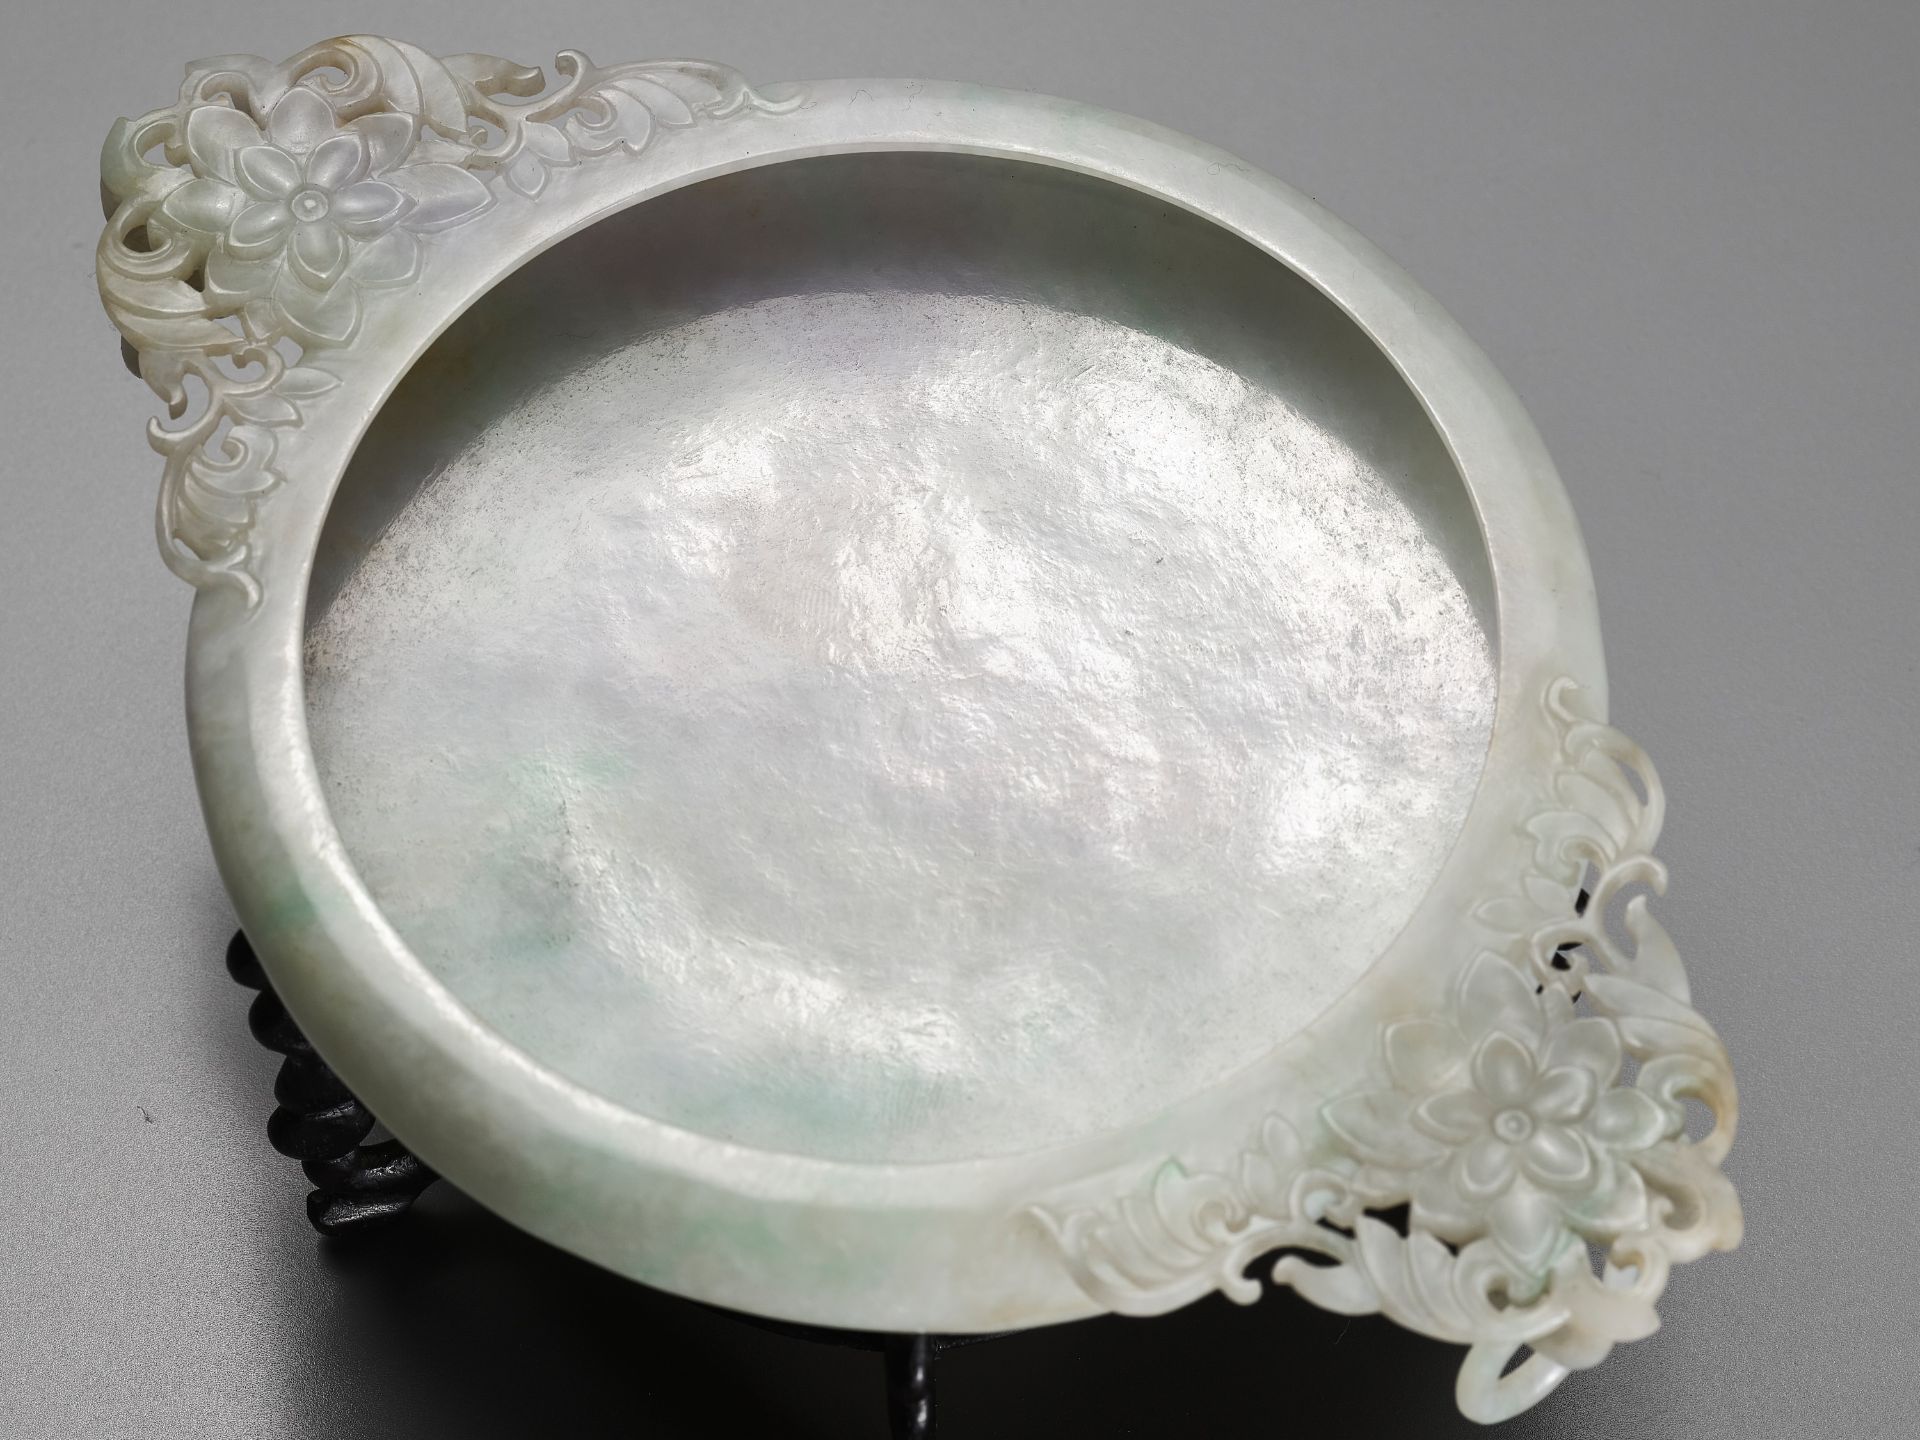 A PAIR OF RARE MUGHAL-STYLE JADEITE MARRIAGE BOWLS, LATE QING DYNASTY - Image 9 of 12